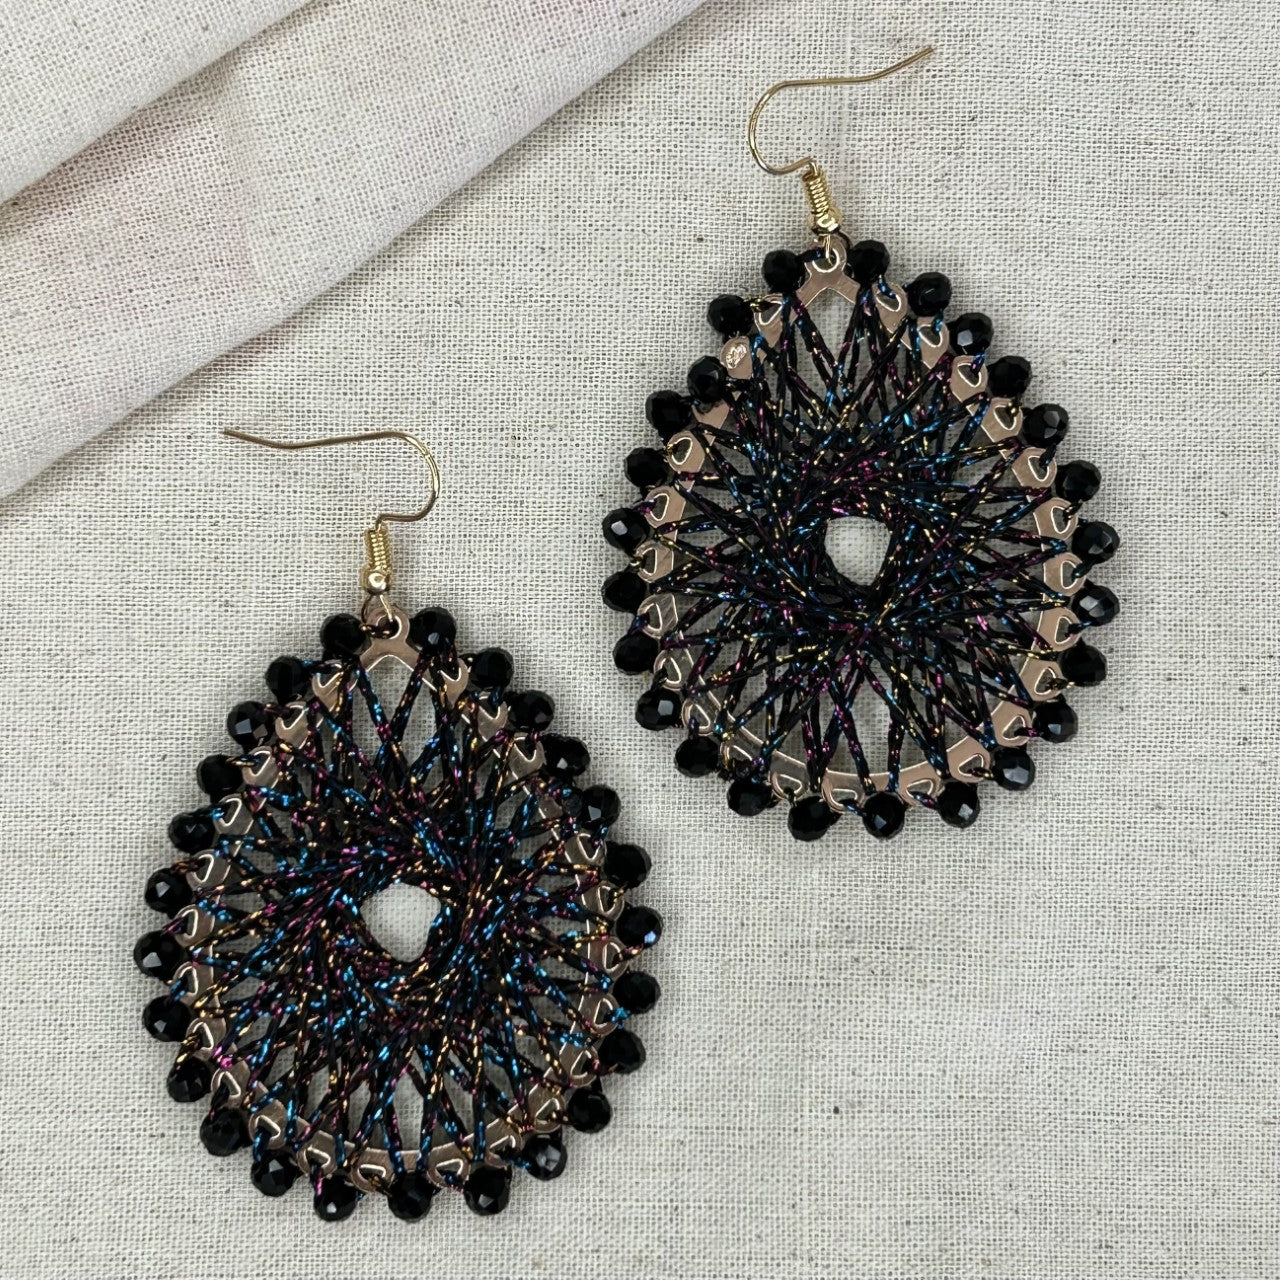 Angelco Accessories Colour burst teardrop earrings on linen background - black colourful